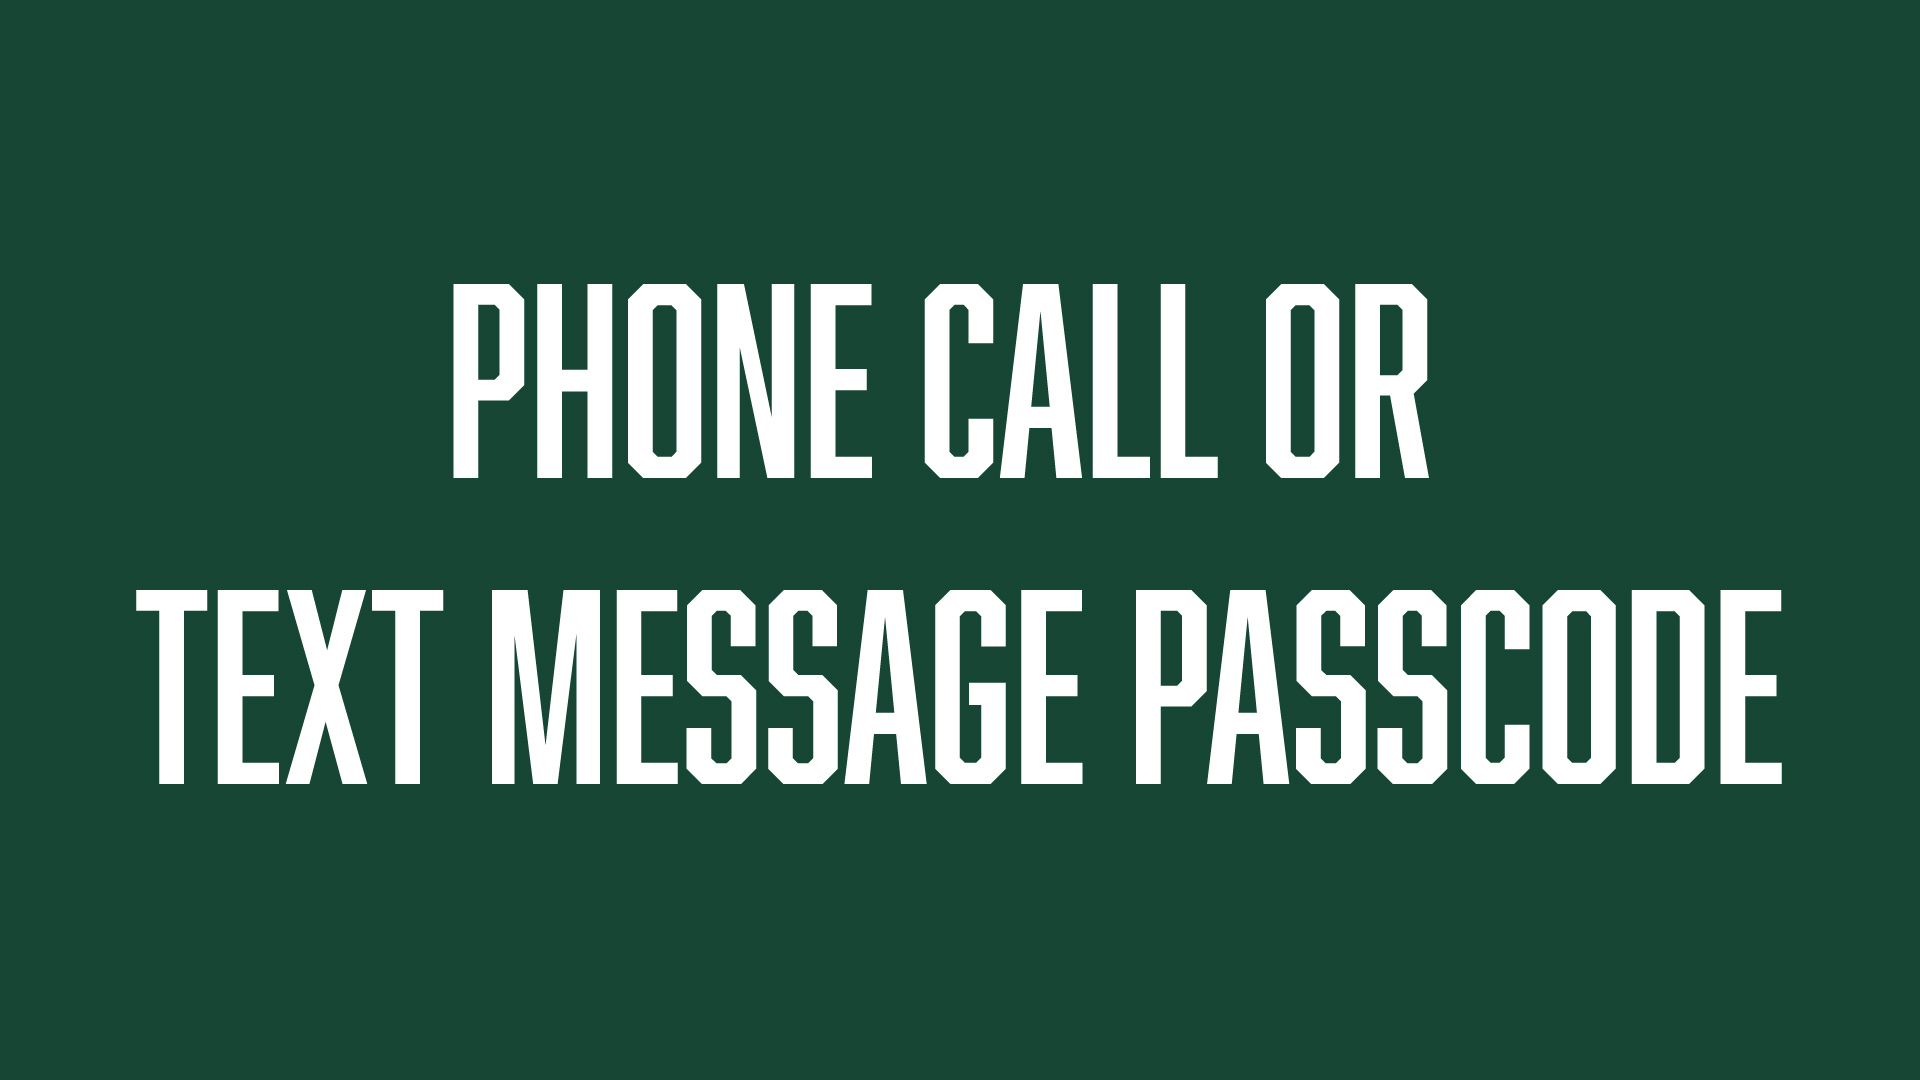 CPKB-Green-Buttons-Phone-Call-or-Text-Message-Passcode.jpg